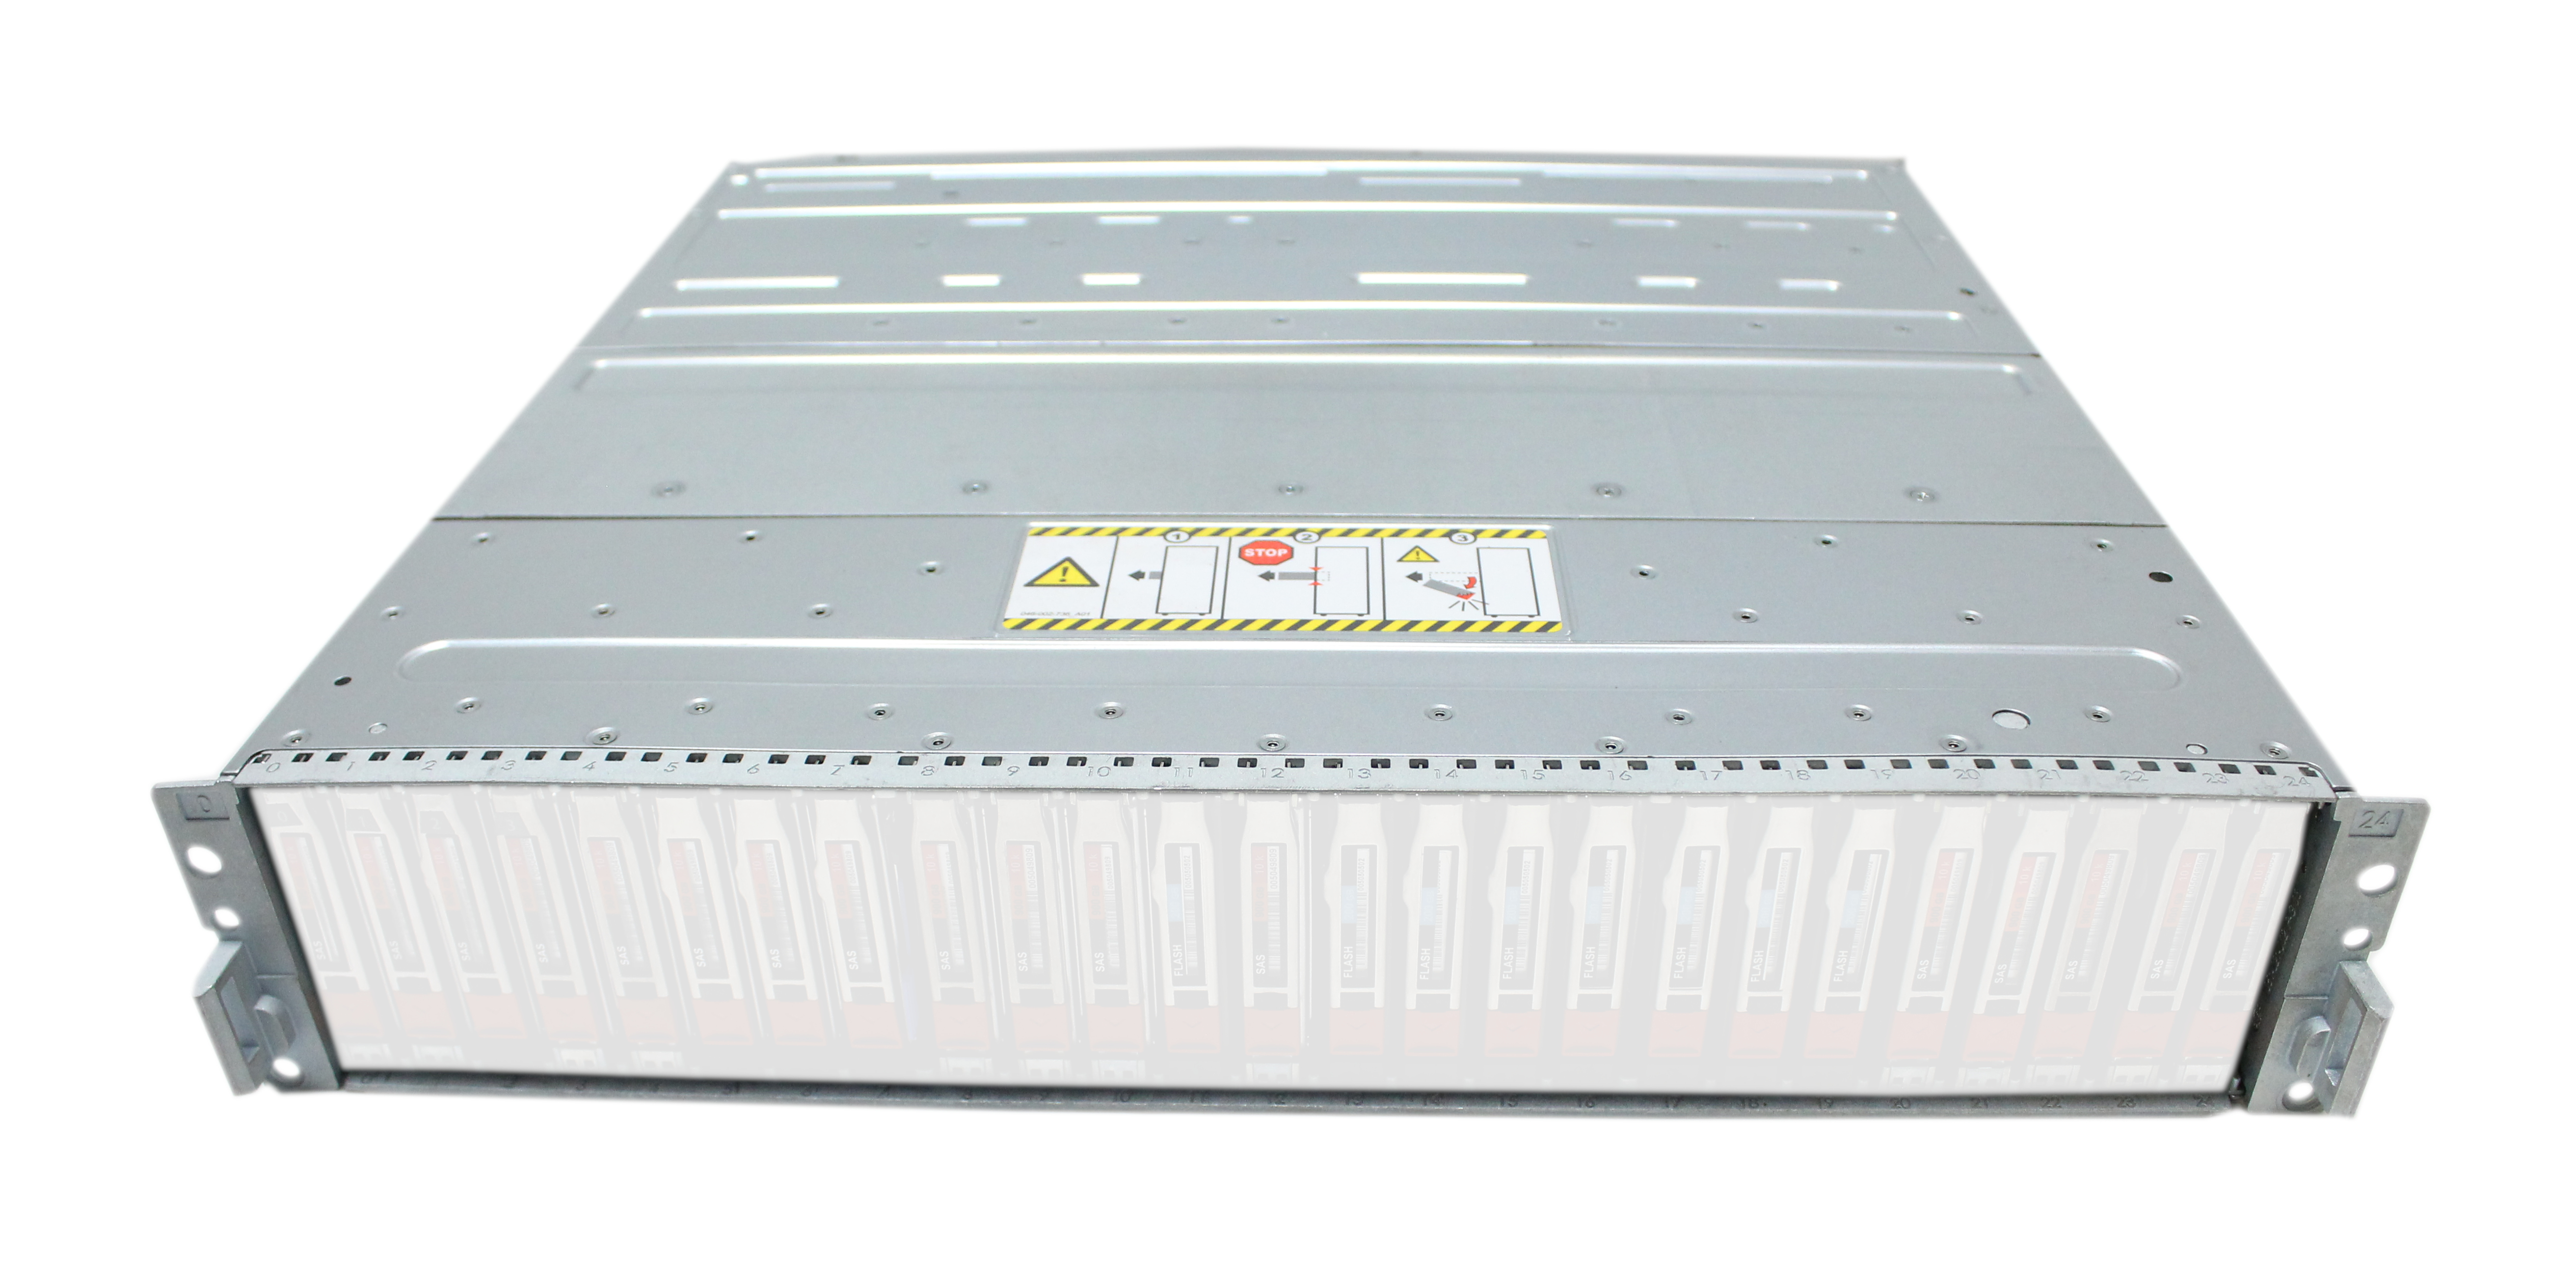 EMC Drive Array VNXe3200 Chassis 25 bay 2.5" 900-541-009 - Click Image to Close